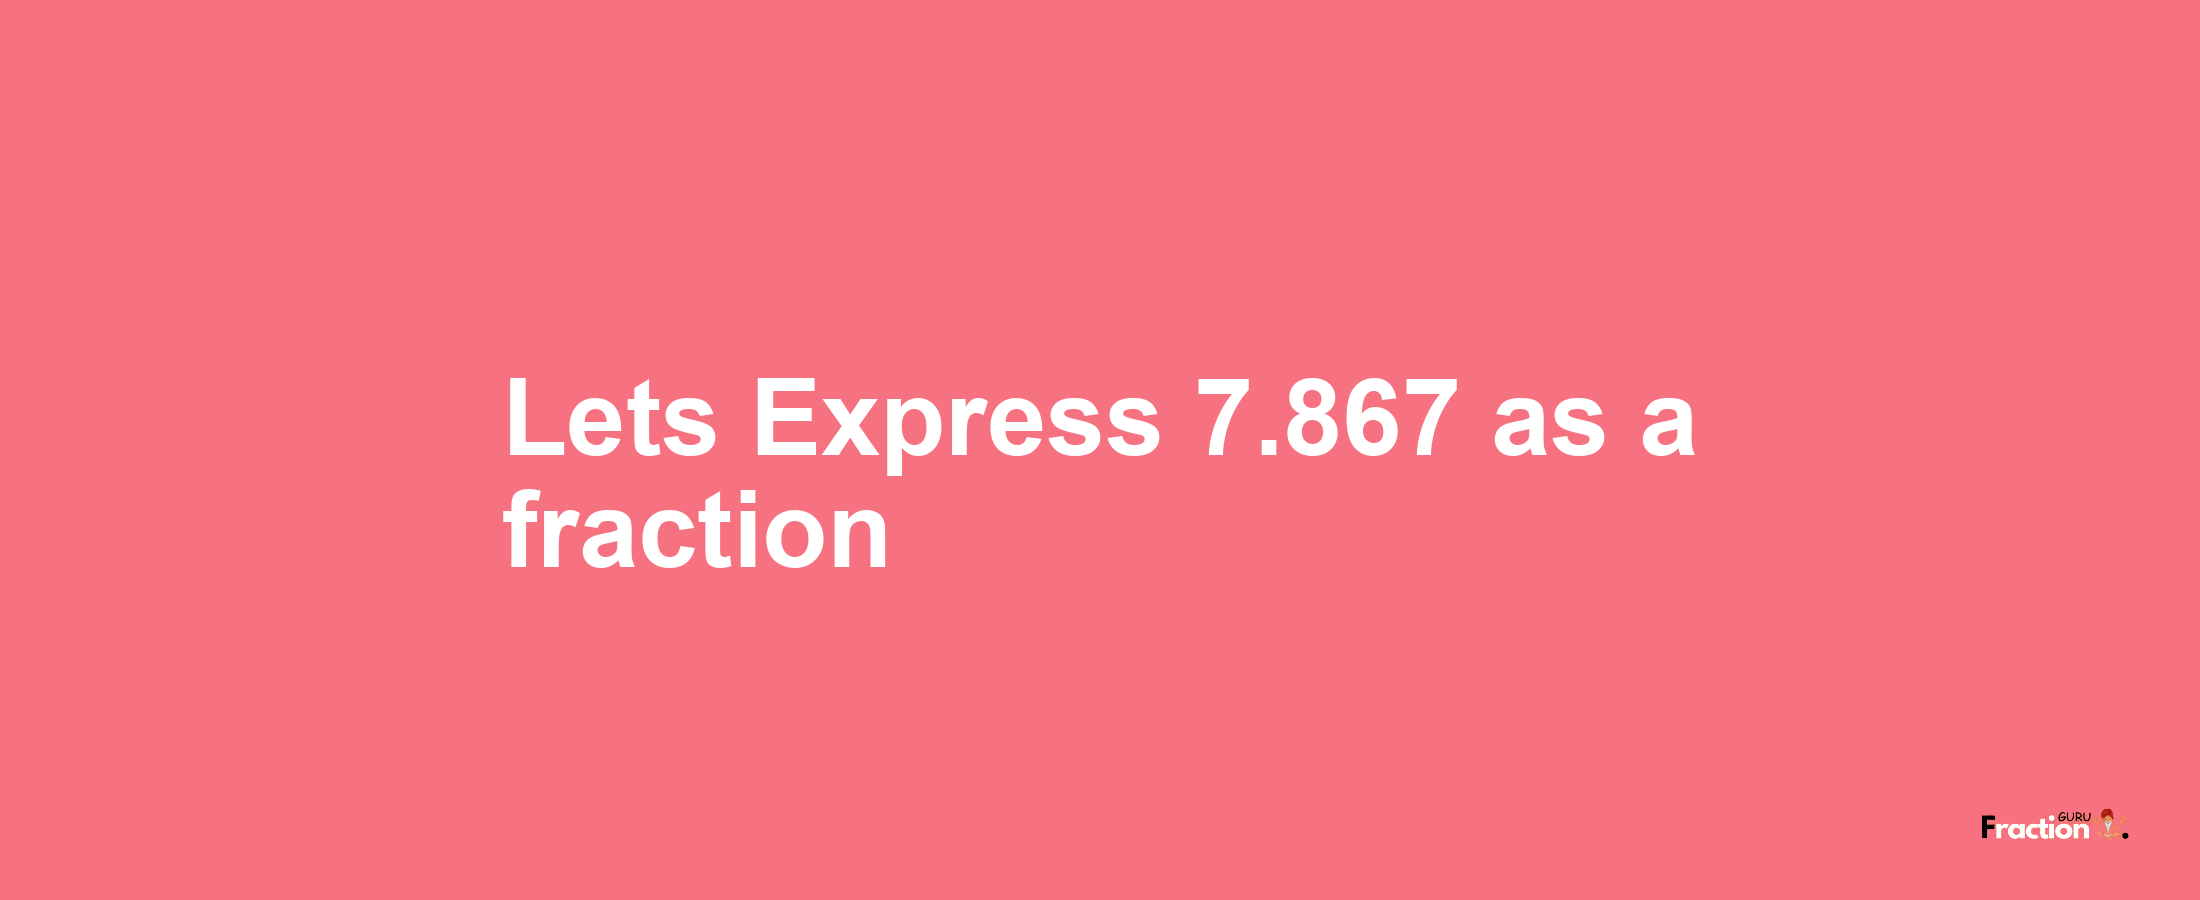 Lets Express 7.867 as afraction